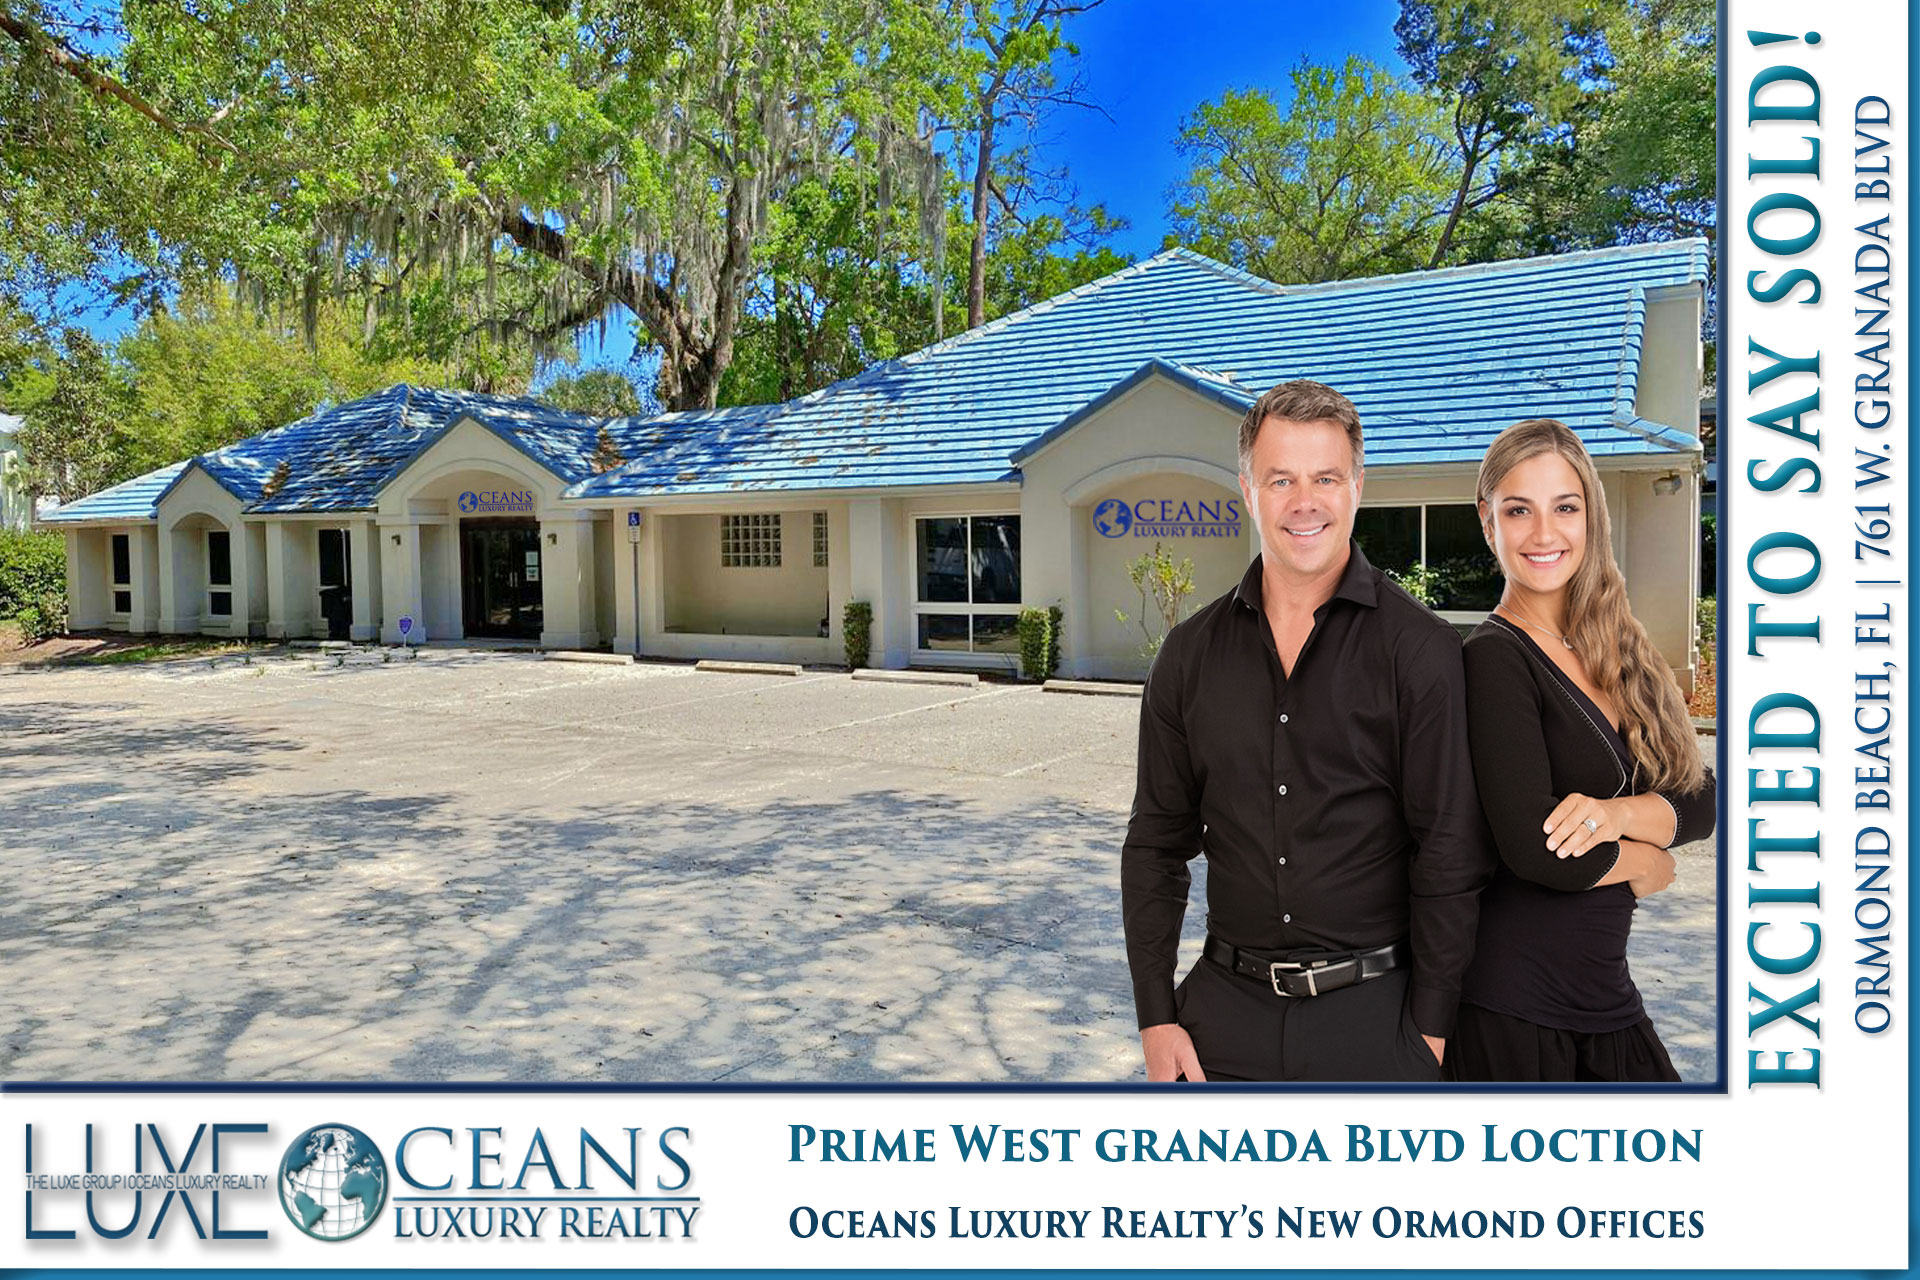 761 W Granada Blvd Ormond Beach FL 32174. Just Sold. The LUXE Group at Oceans Luxury Realty 386-299-4043